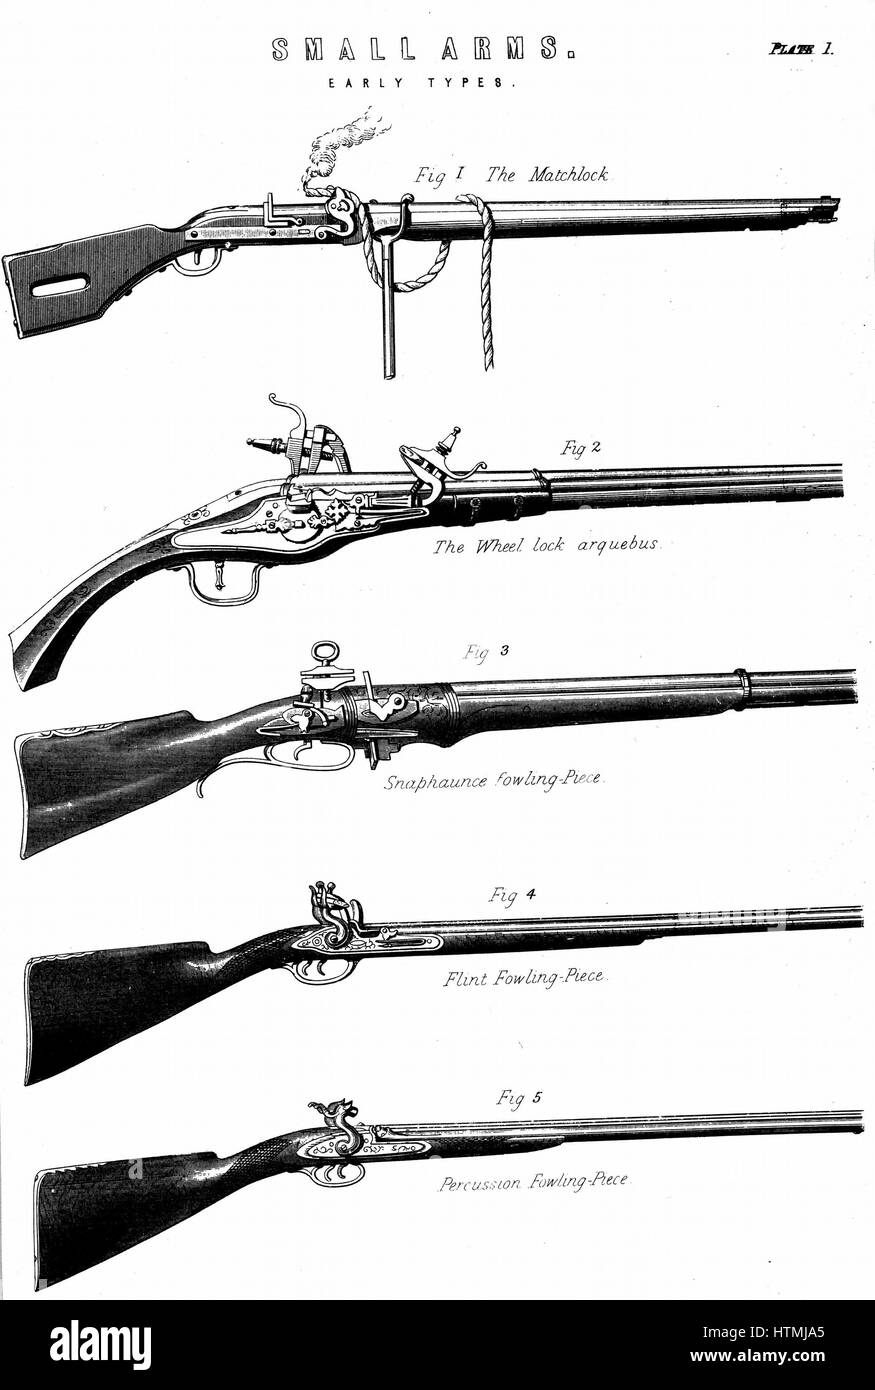 Examples of various hand-gun firing mechanisms. Top to bottom: Matchlock, Wheel lock arquebus, Snaphaunce Fowling-piece, Flint Fowling piece, Percussion Fowling-piece or scent bottle lock of c1807. Wood engraving c1880. Stock Photo